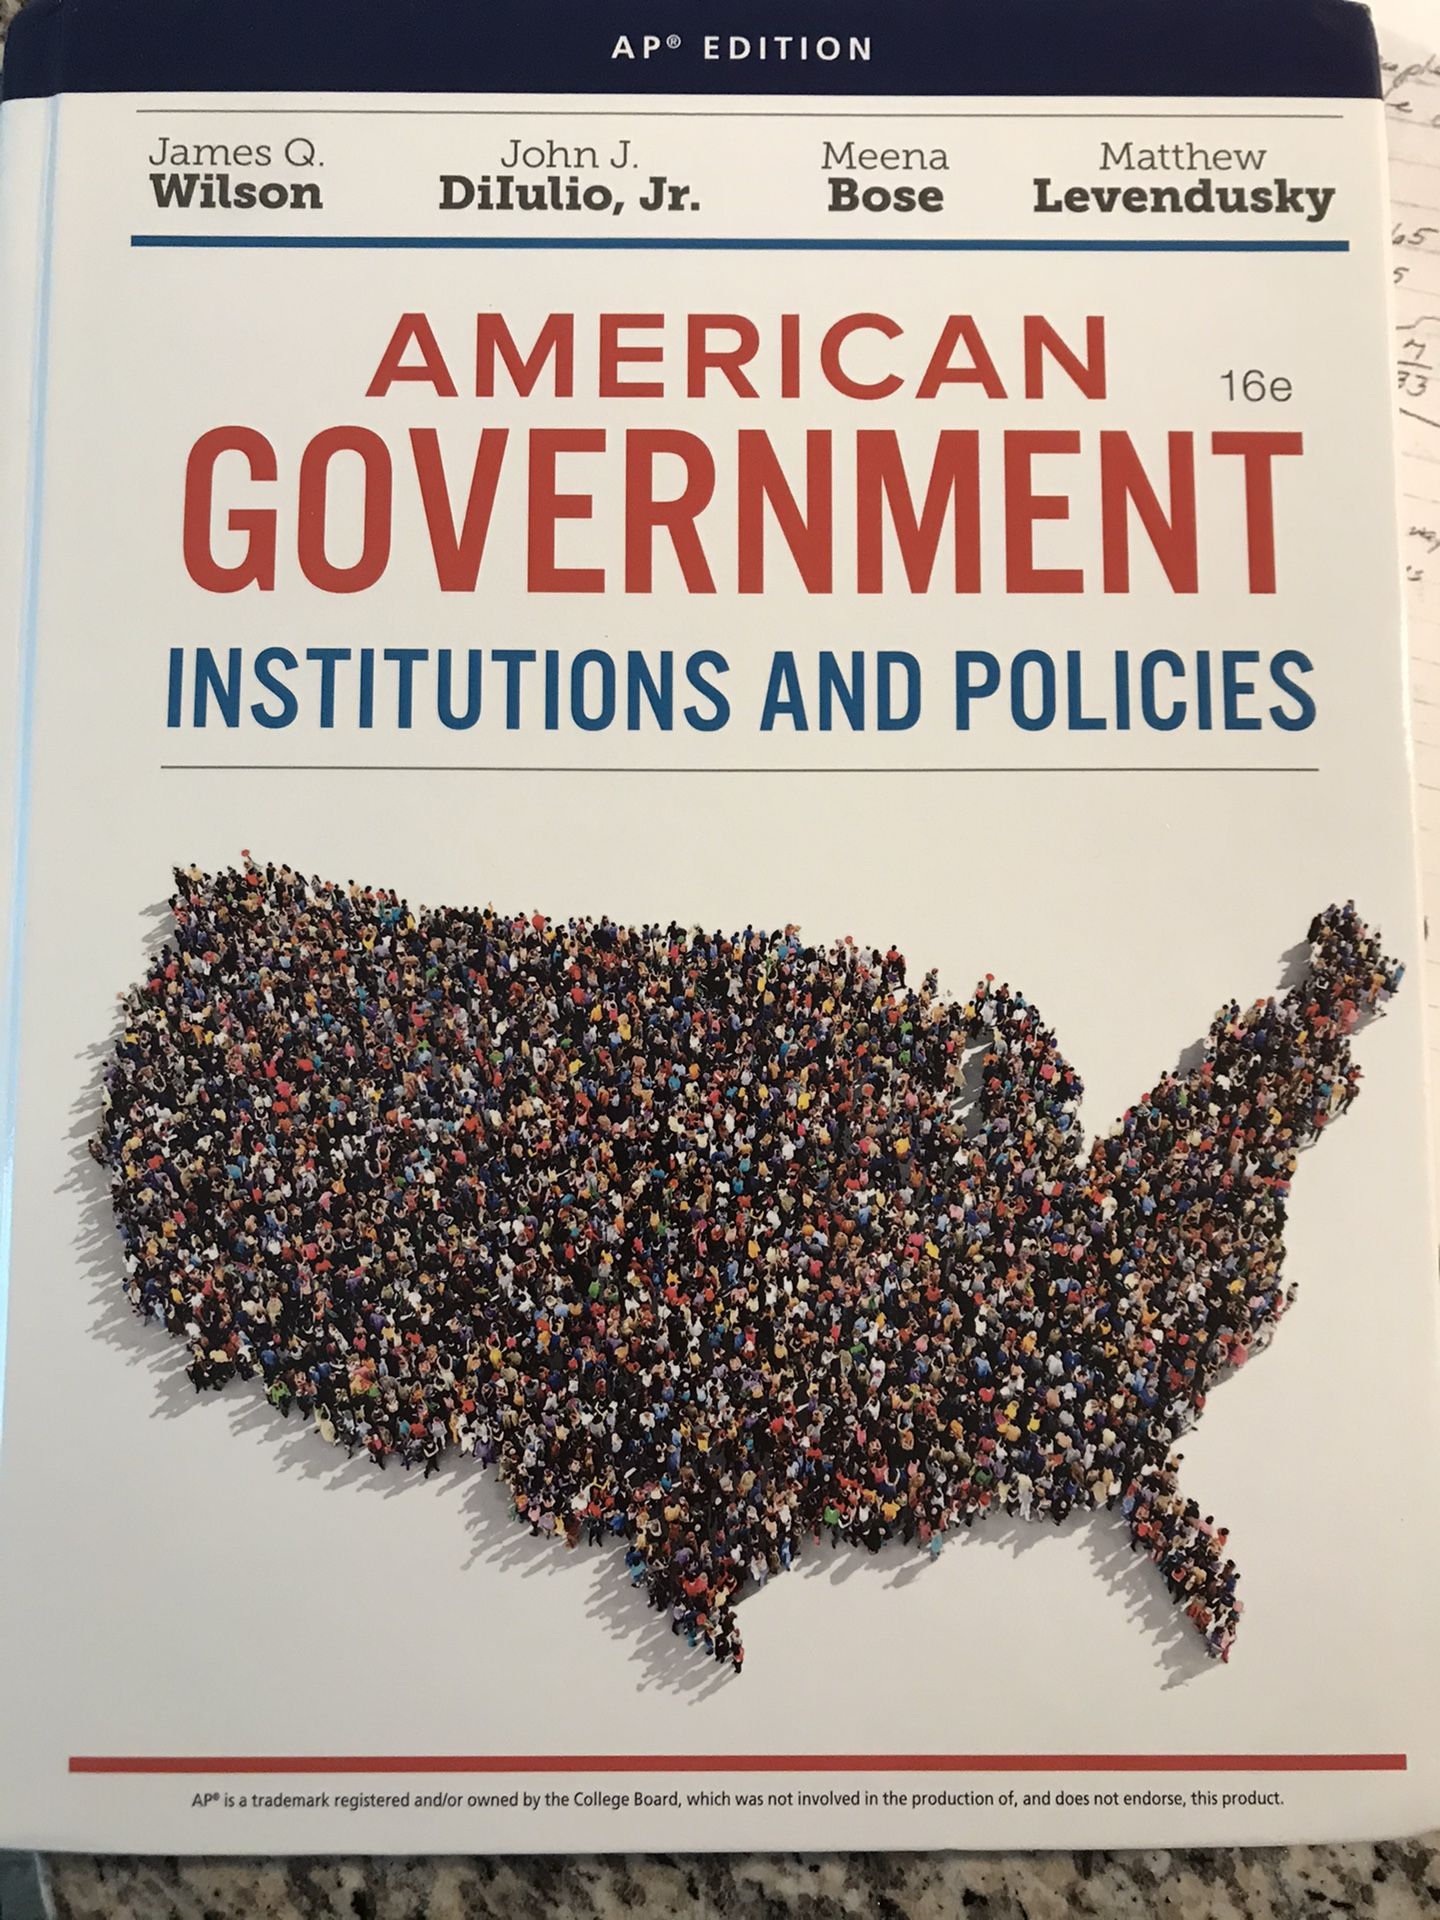 American Goverment textbook